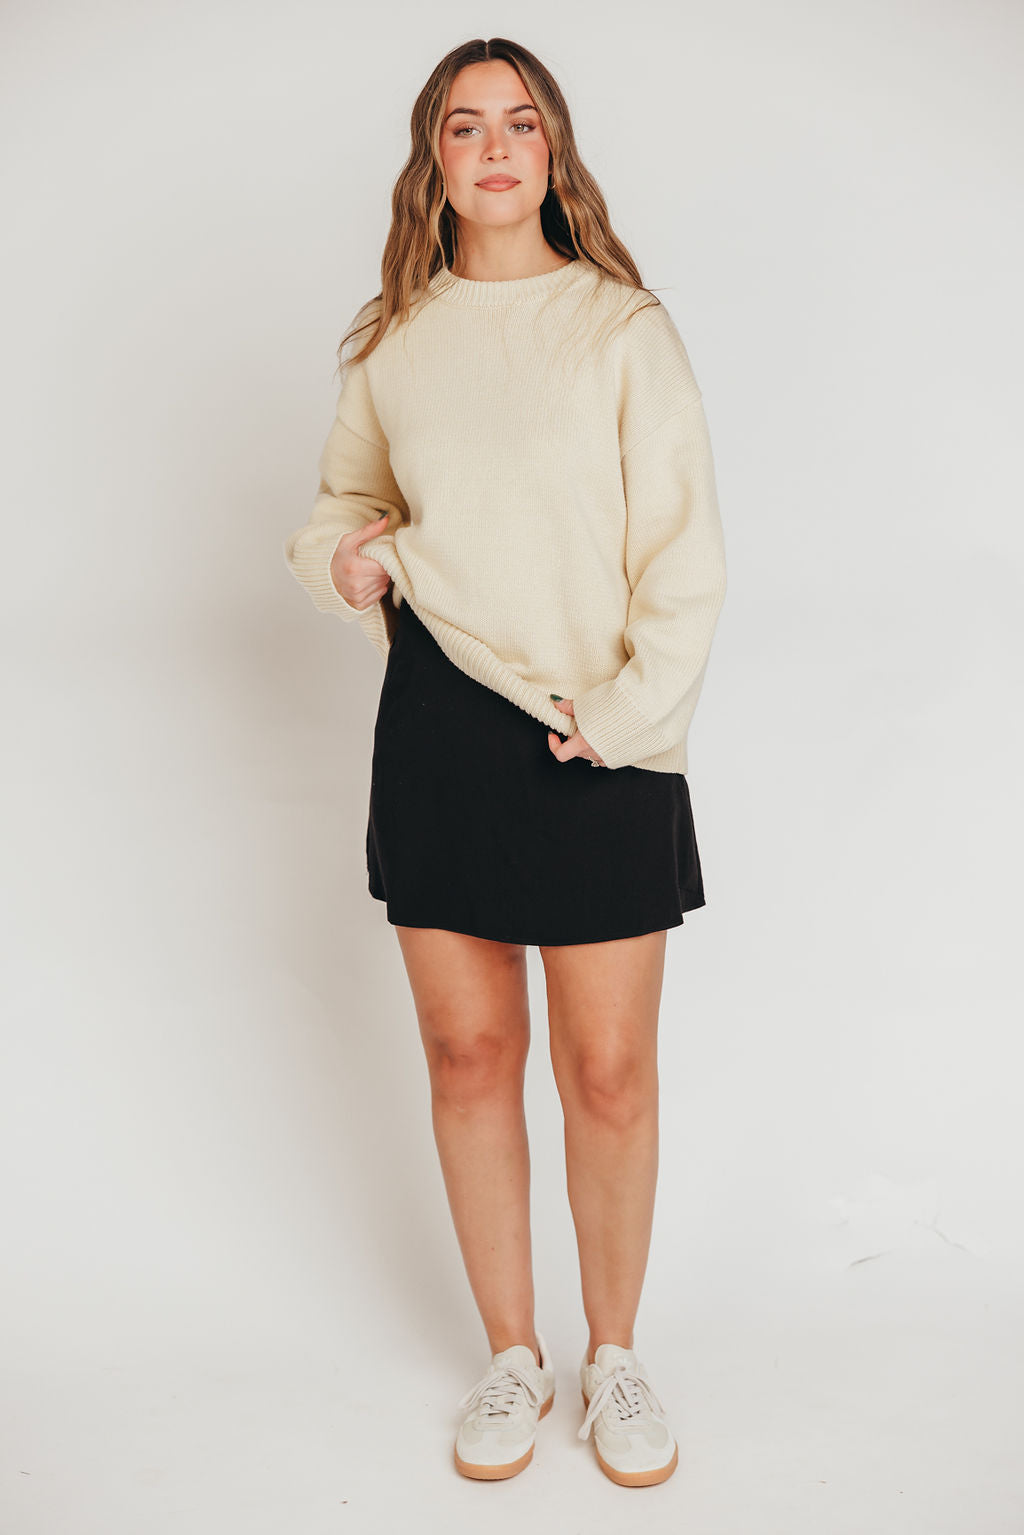 The Talia Mini Skirt with Built-In Shorts in Black